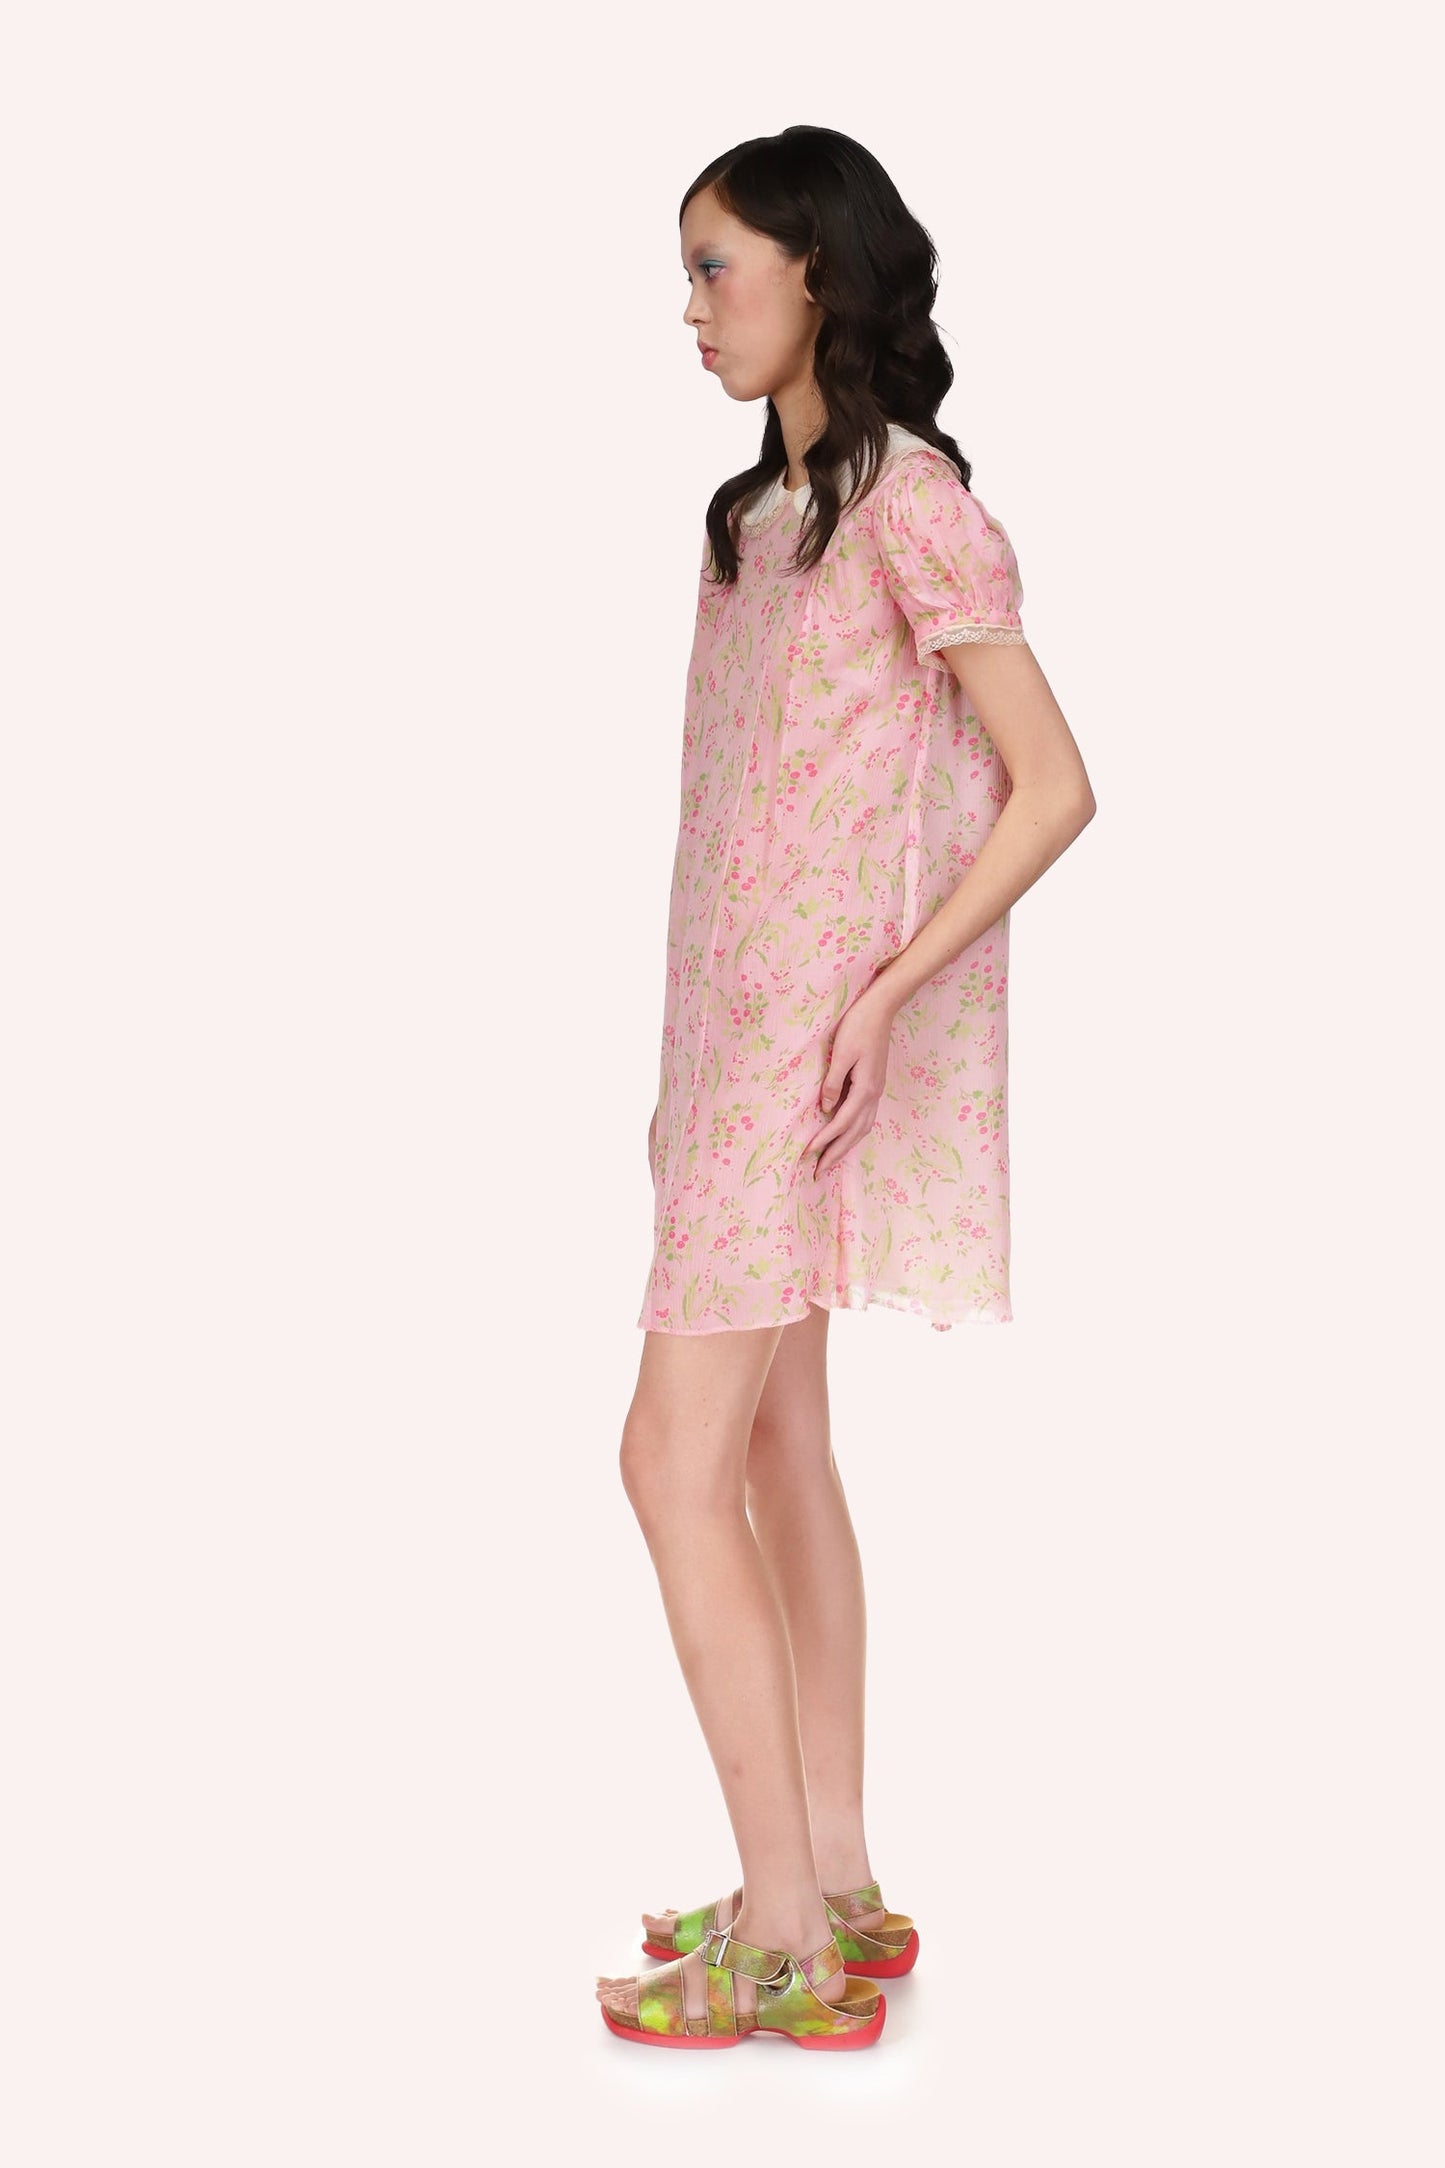 Babydoll Dress baby pink with floral pattern, mid-thigh, small sleeves, white collar over shoulders